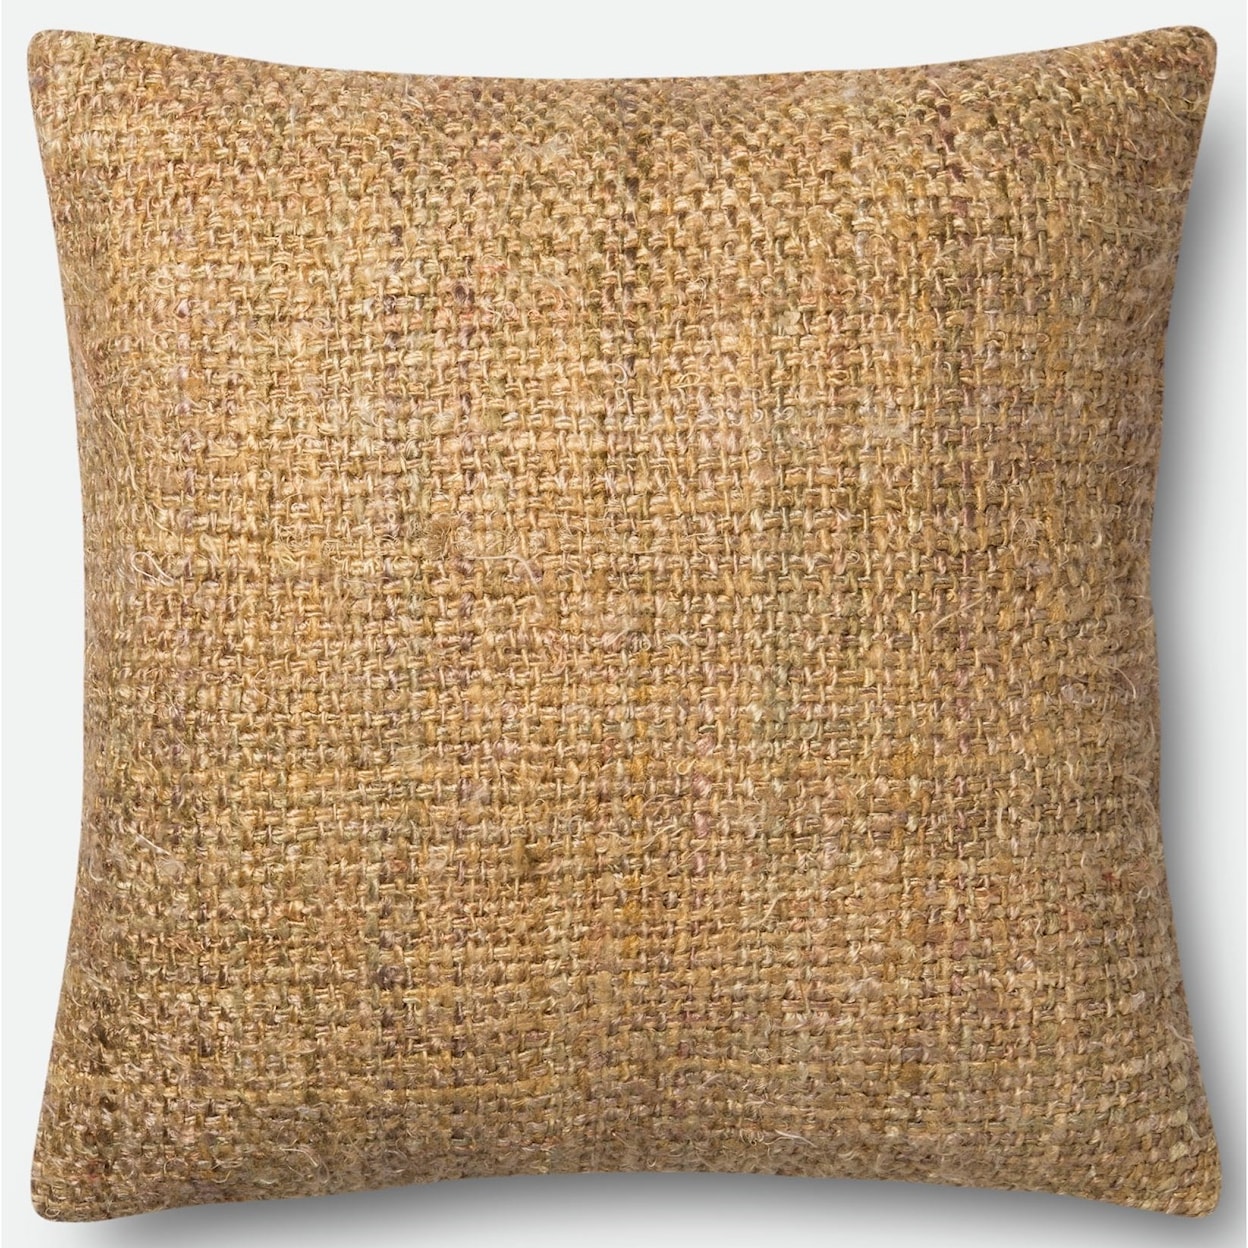 Magnolia Home by Joanna Gaines for Loloi Accent Pillows 22" X 22" Cover w/Poly Pillow